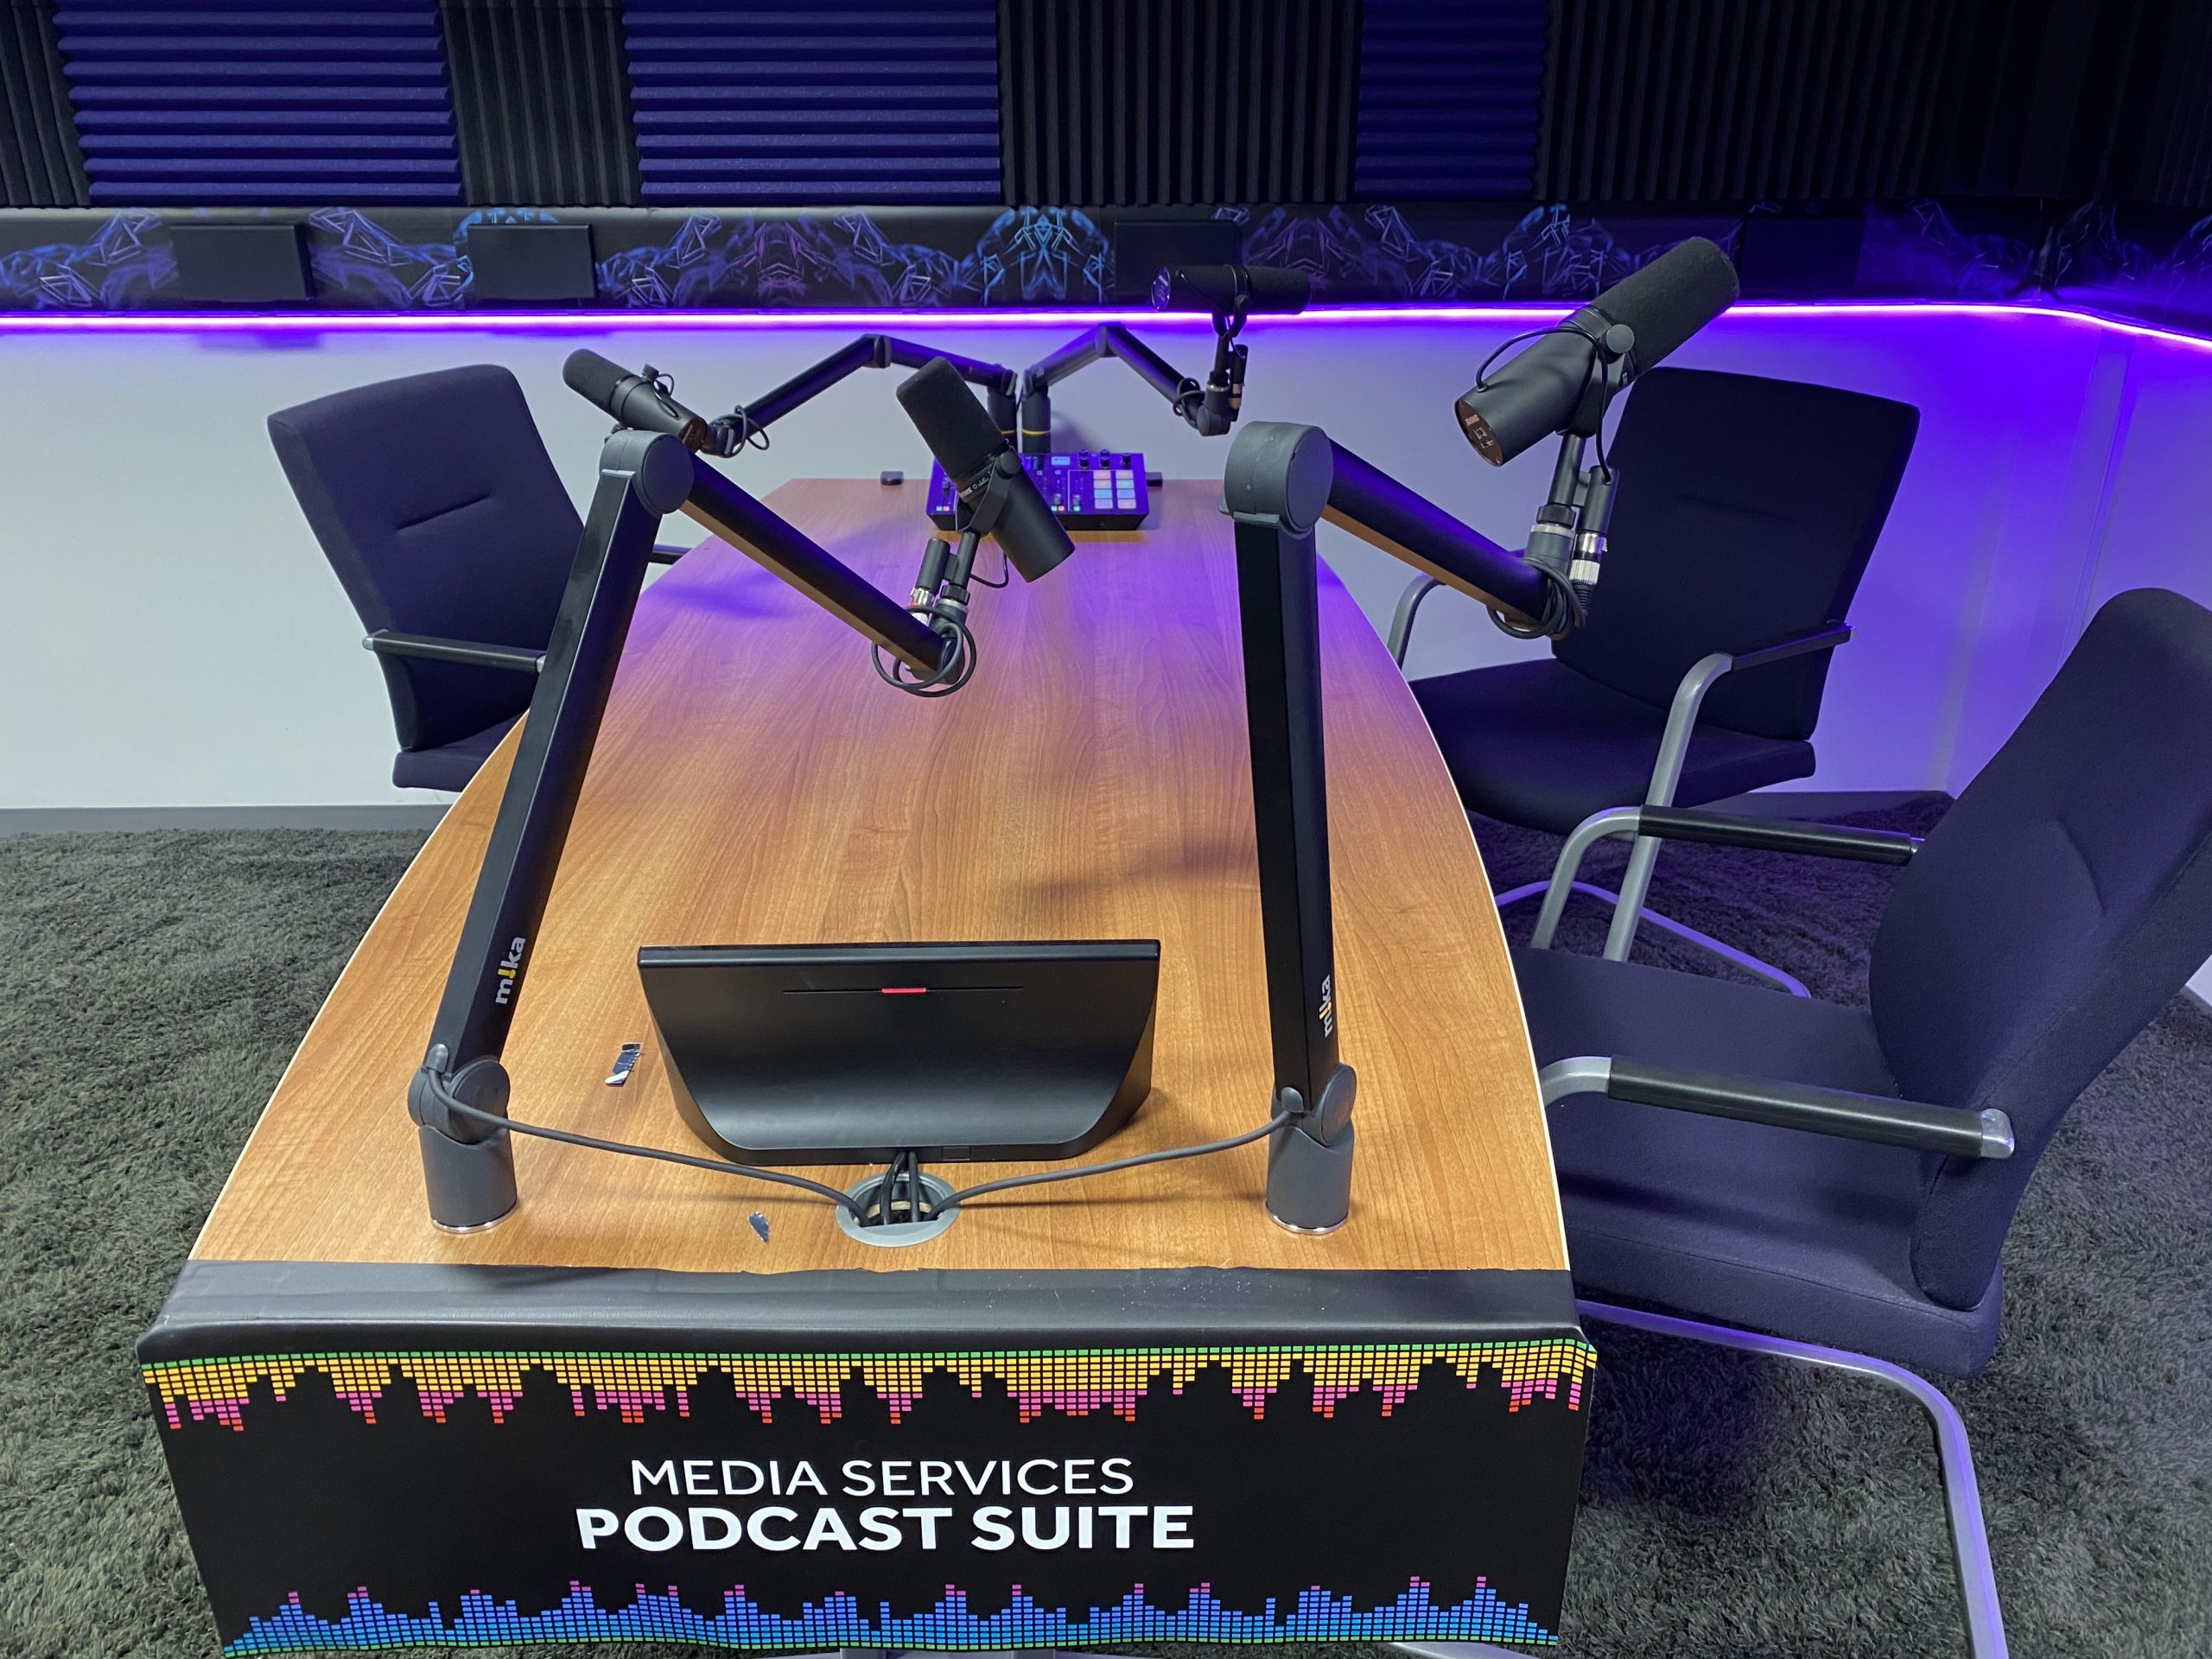 Media Services Podcasting Suite